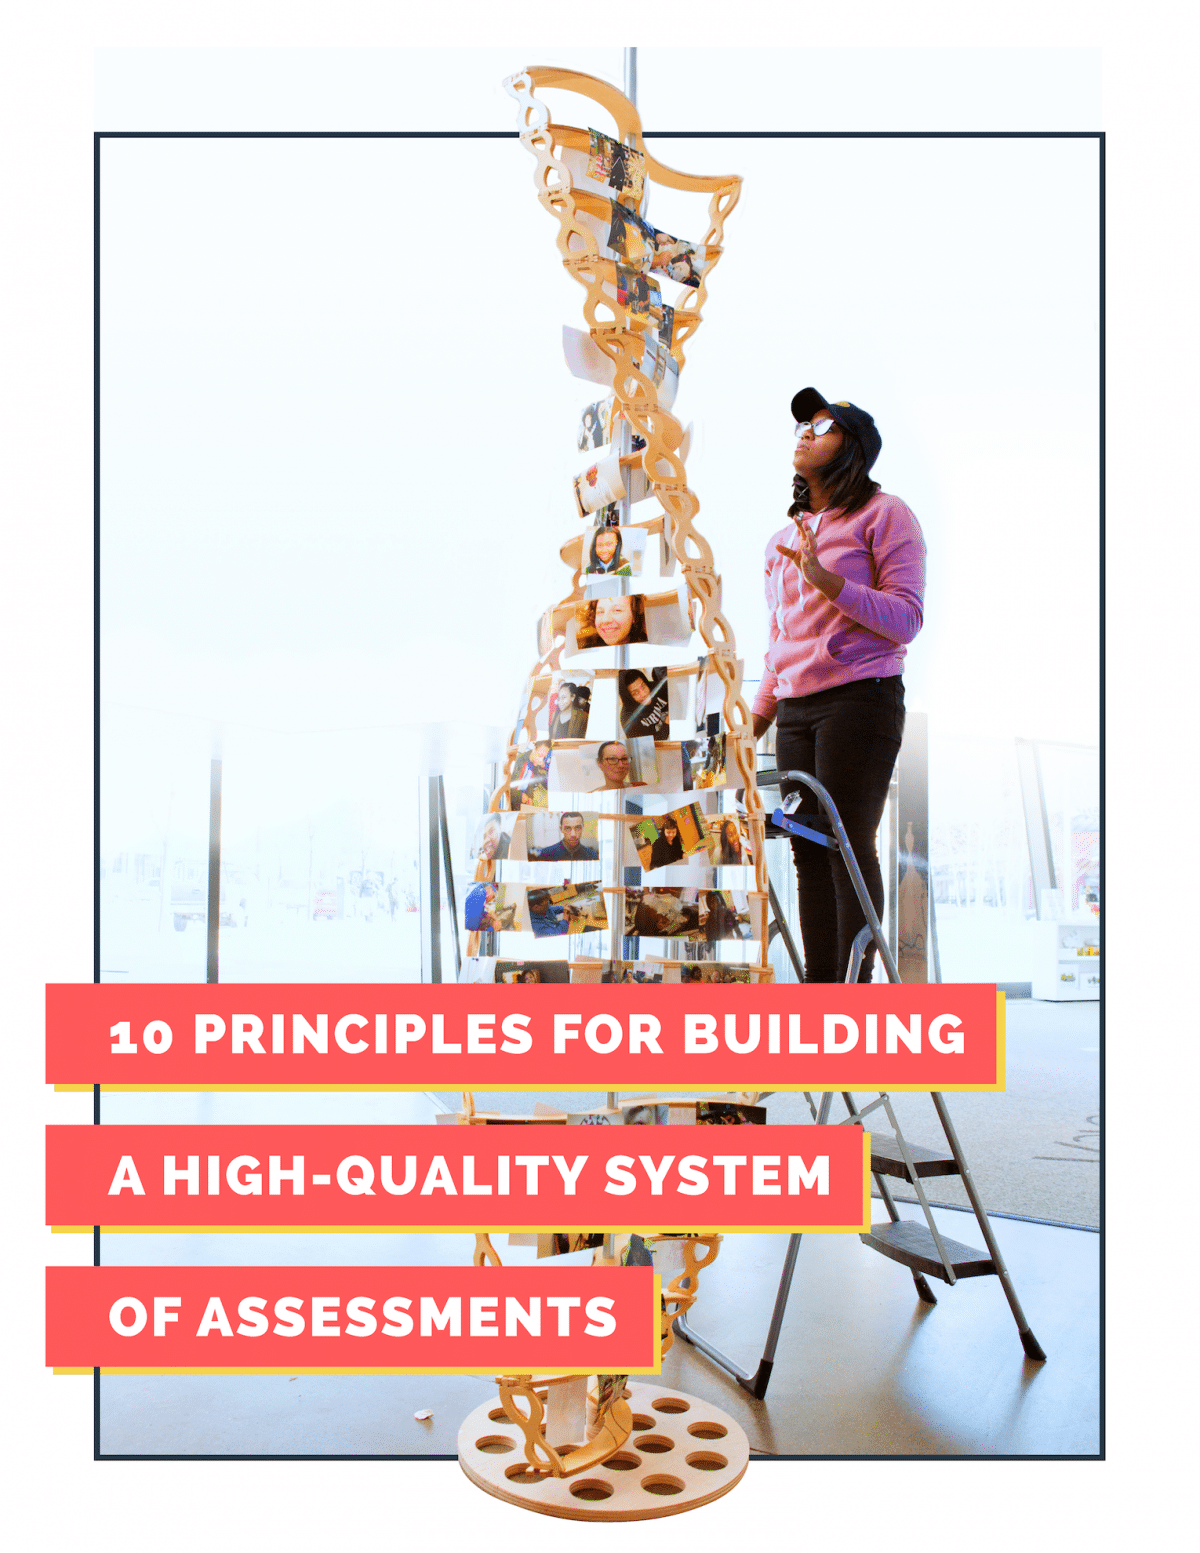 Our newest collaborative effort is 10 Principles for Building a High-Quality System of Assessments. The principles outlined in this paper will help states and districts build and evolve a high-quality system of assessments that puts each and every student’s learning at the center.